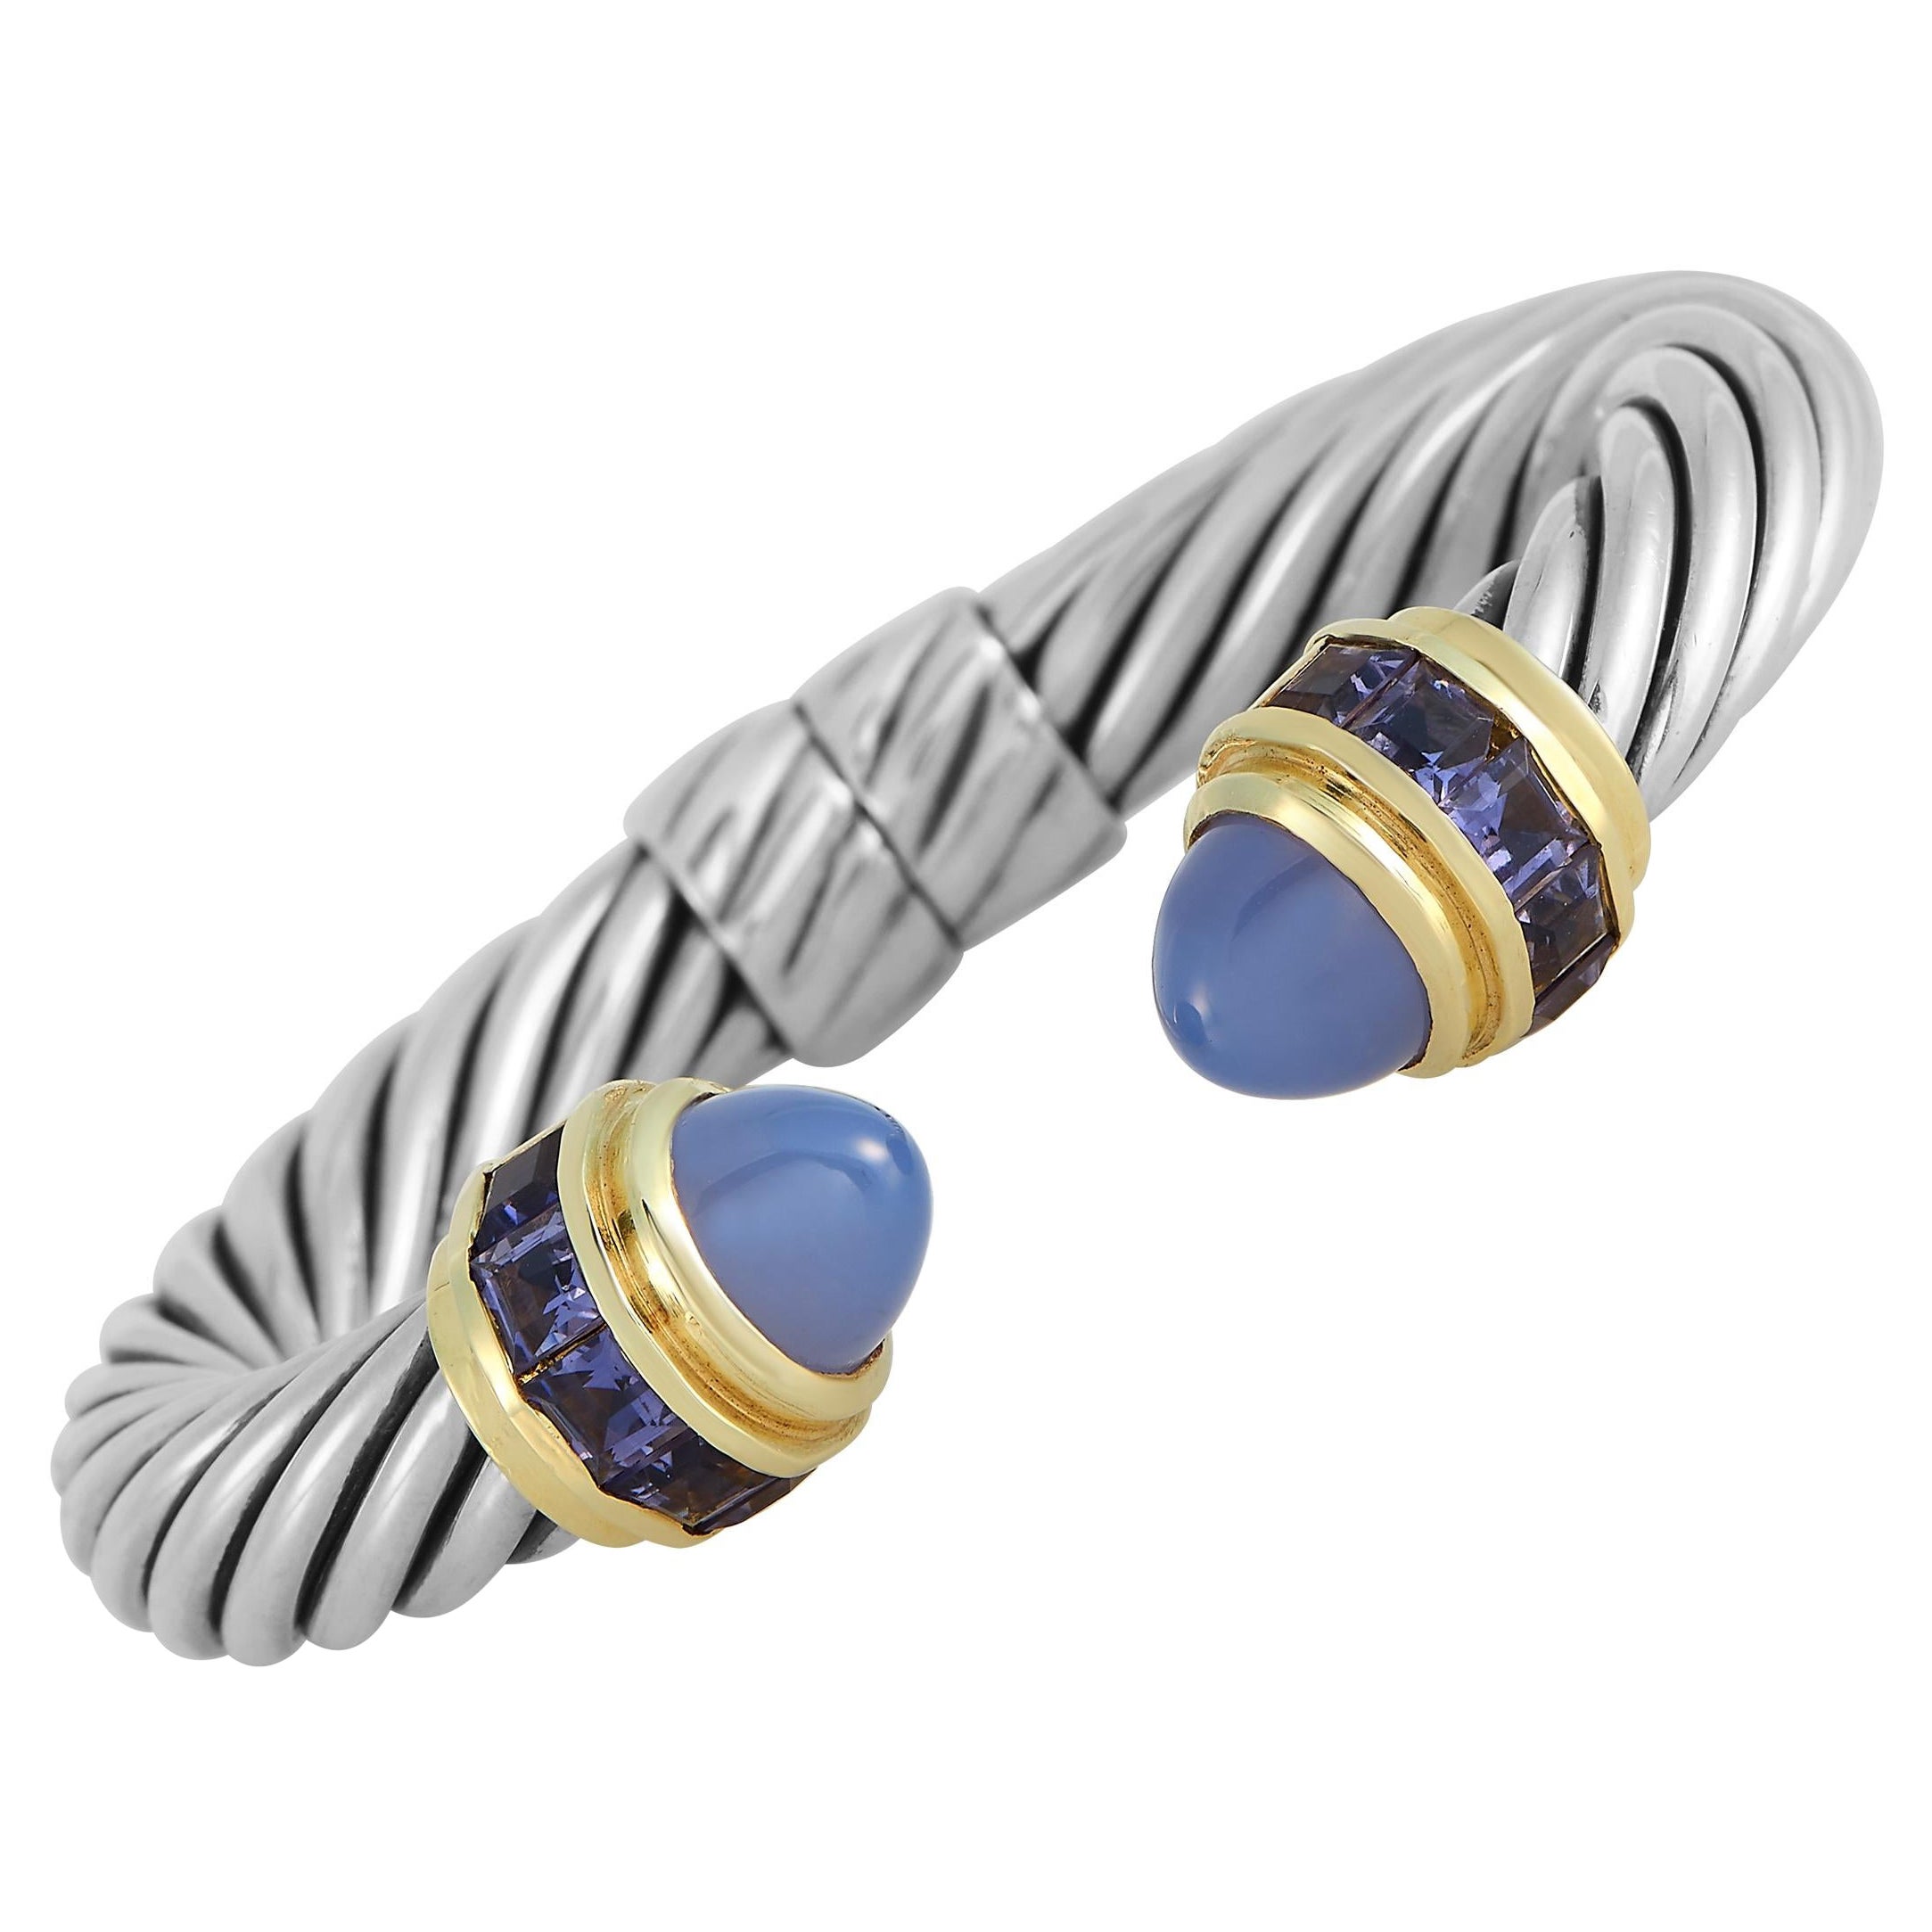 David Yurman 14K Yellow Gold and Silver Iolite and Chalcedony Cable Bracelet